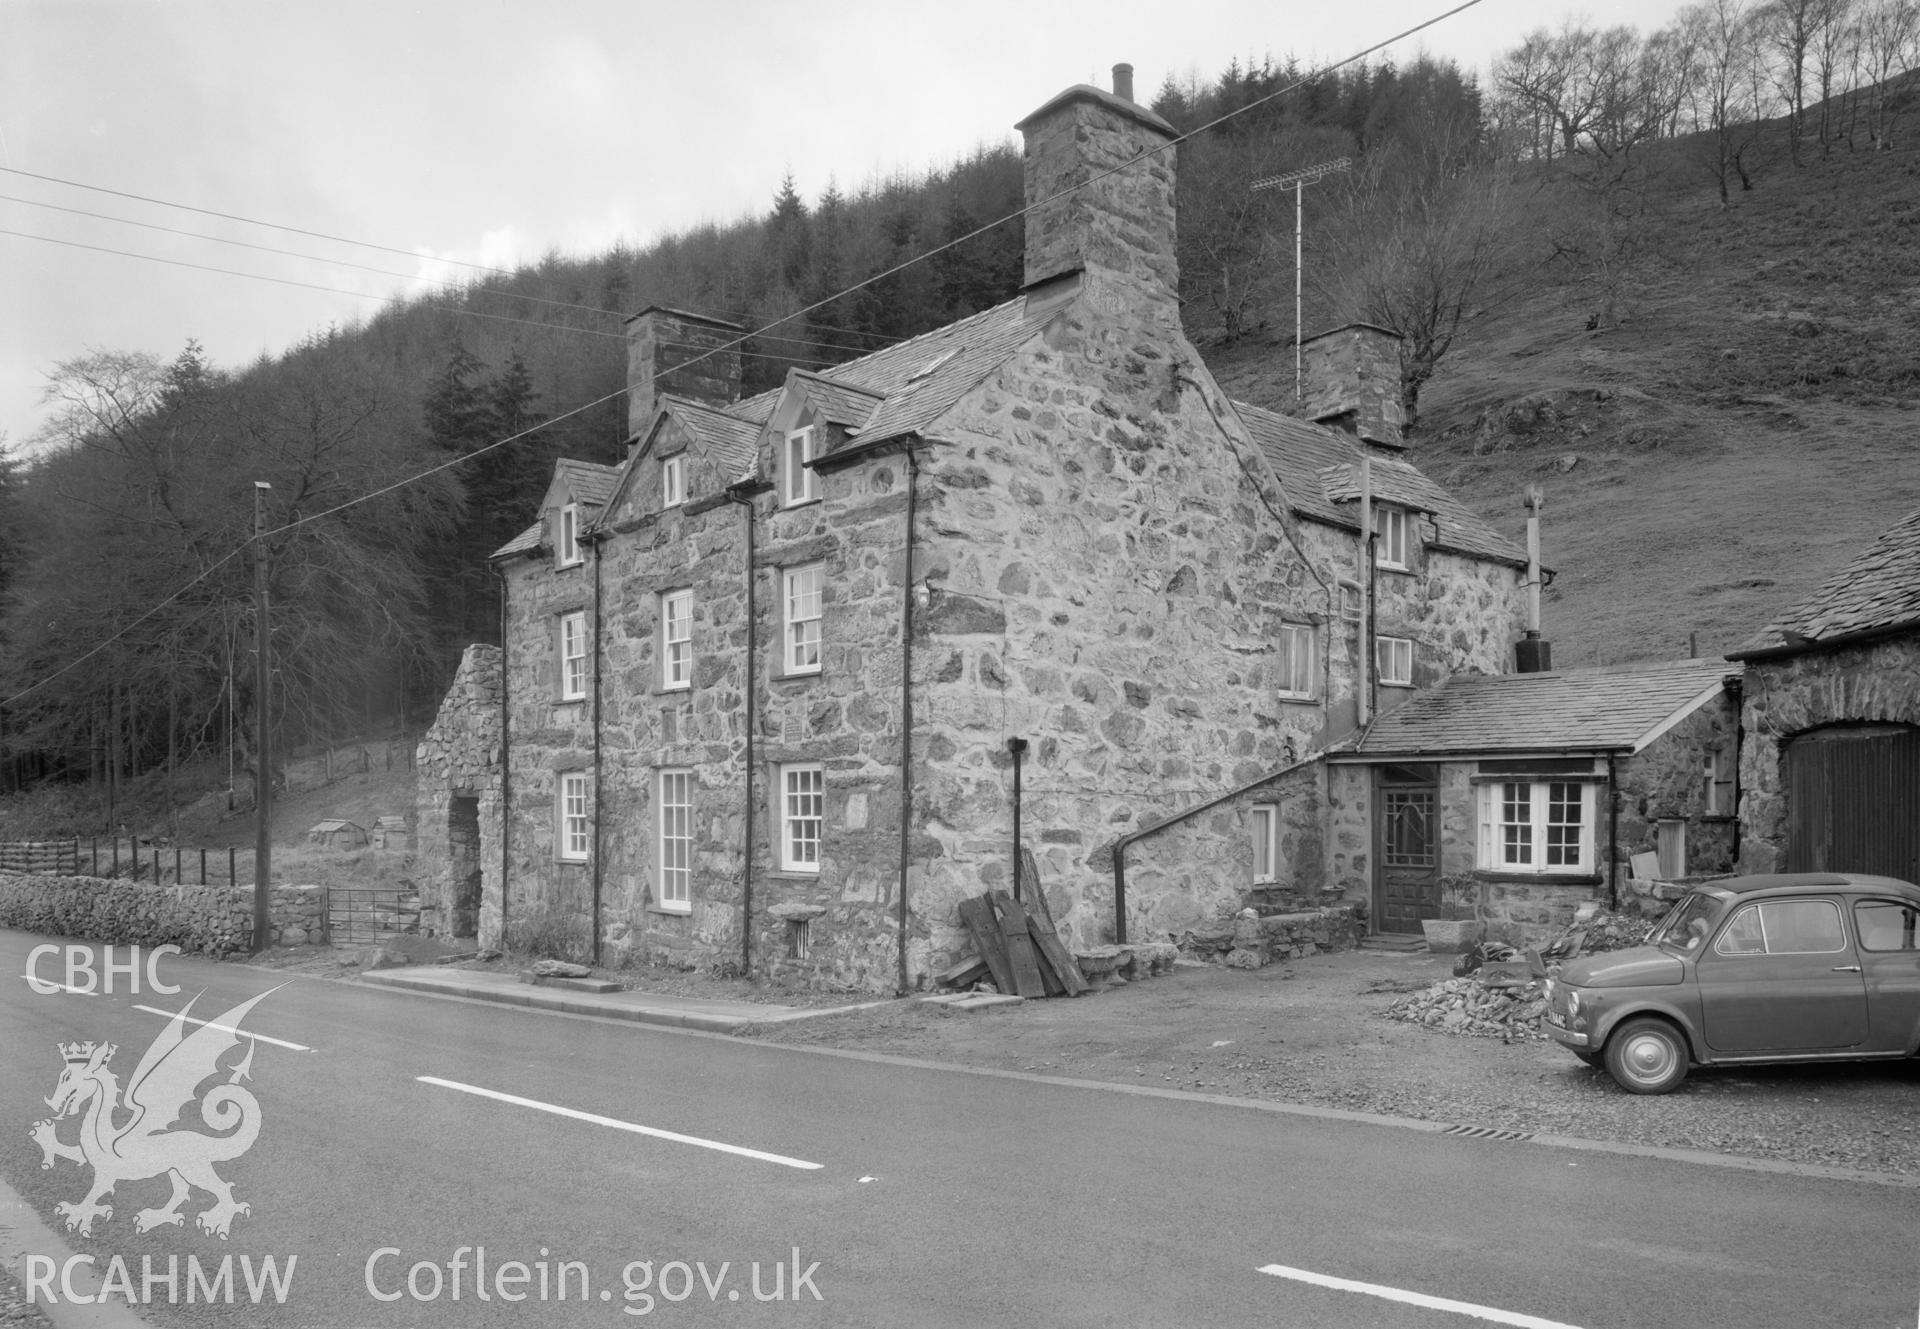 Black and white acetate negative showing a view of Hywel Ddu, north east of Dolgellau.